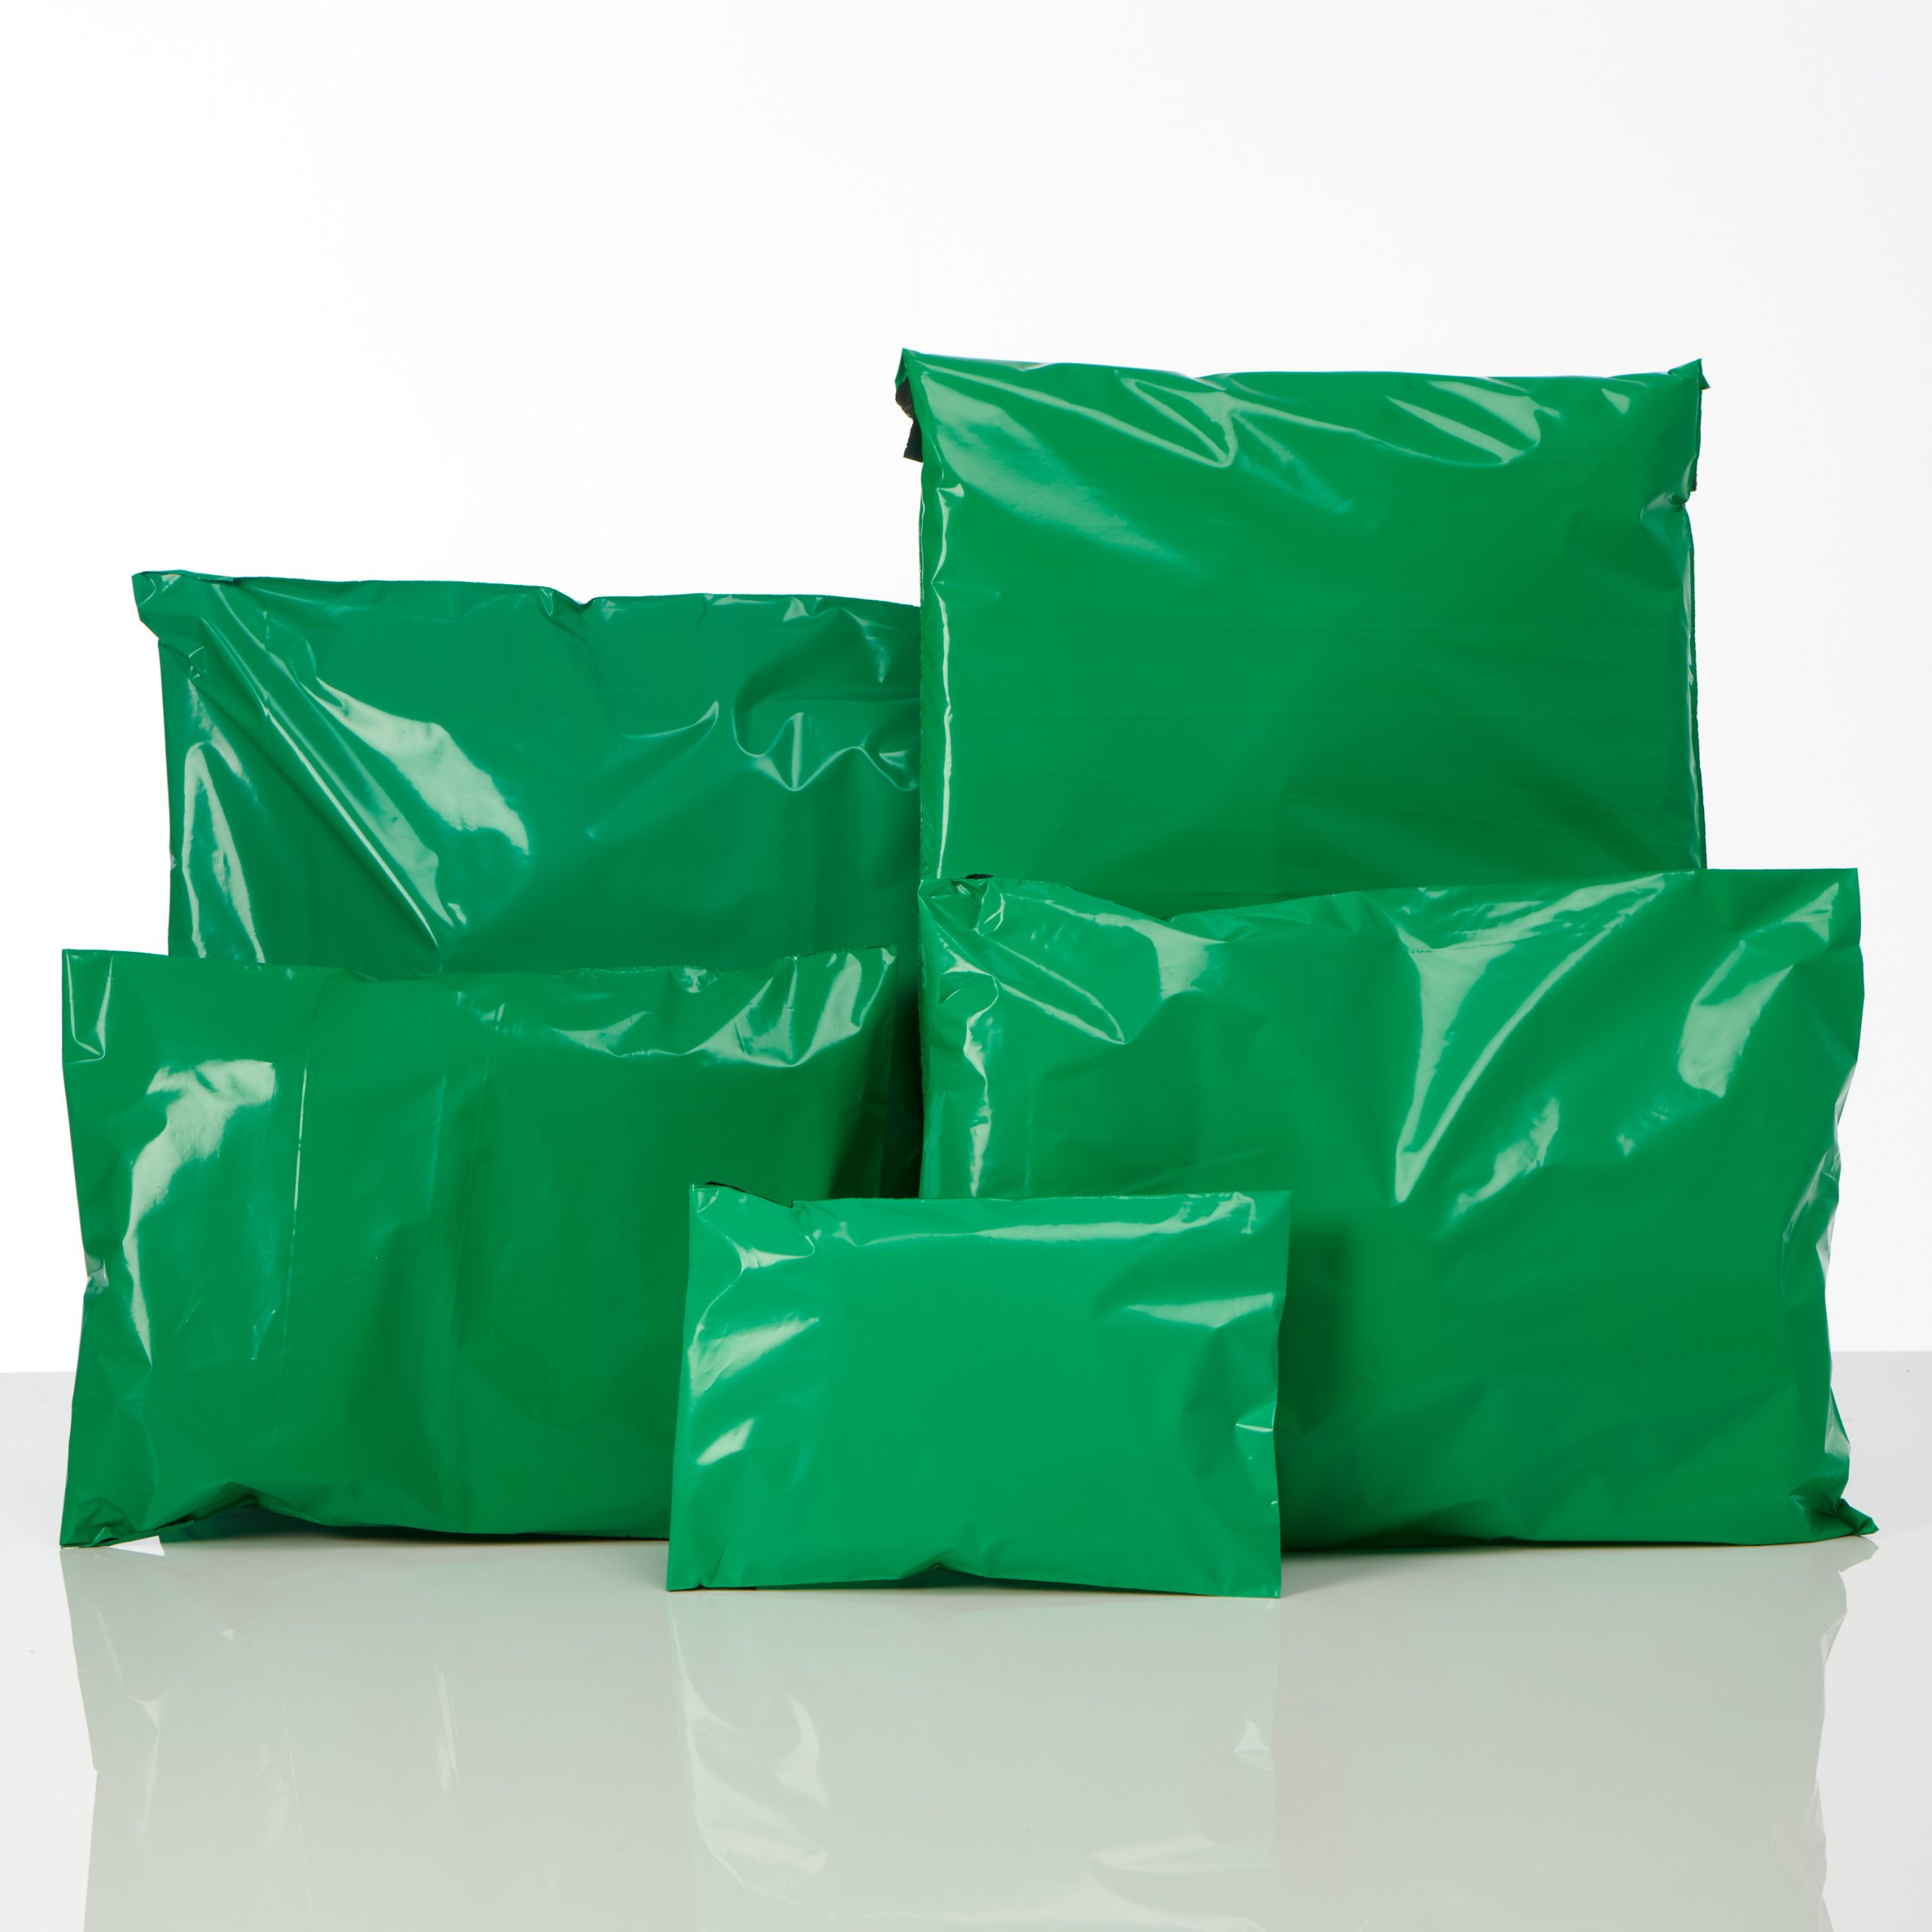 50 MIXED DARK GREEN MAILING BAGS PARCEL PACKAGING 6x9 10x14 12x16 STRONG MAILERS 